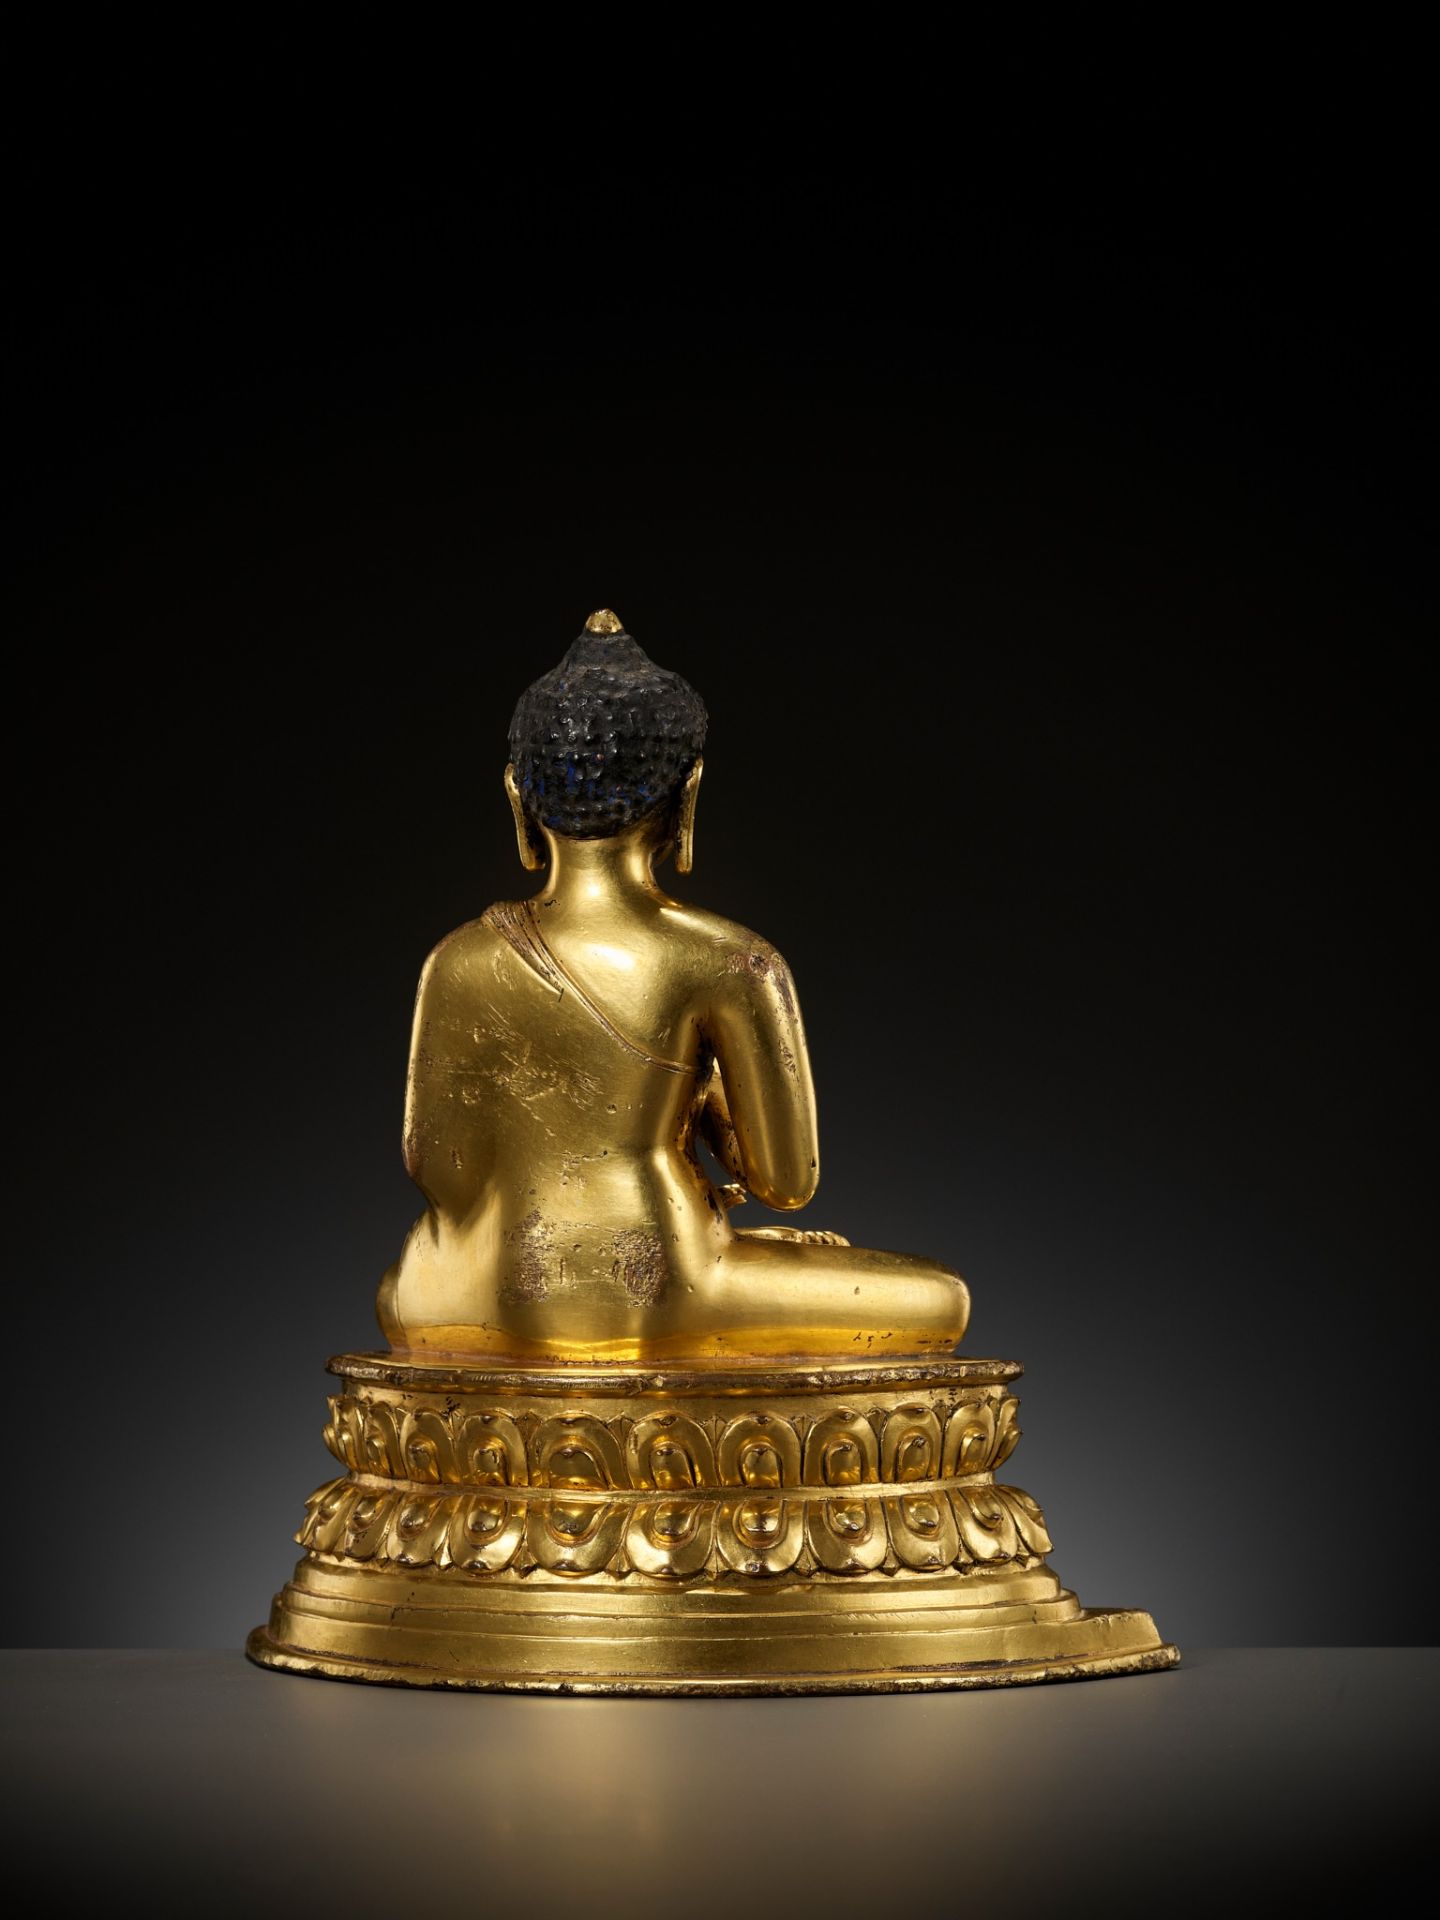 A GILT COPPER ALLOY FIGURE OF AMOGHASIDDHI, POSSIBLY DENSATIL, TIBET, 14TH-15TH CENTURY - Image 17 of 22